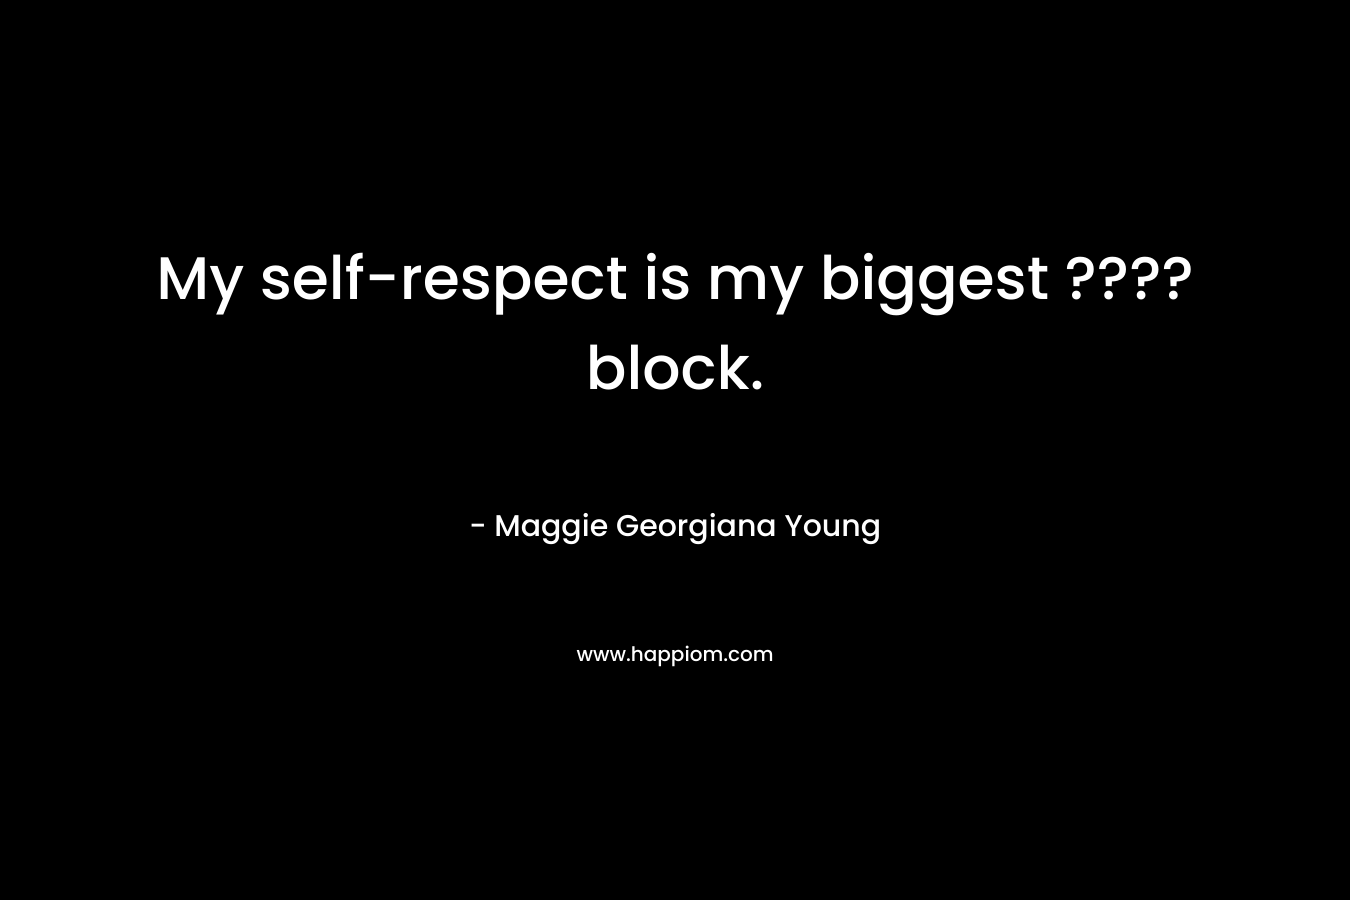 My self-respect is my biggest ???? block. – Maggie Georgiana Young